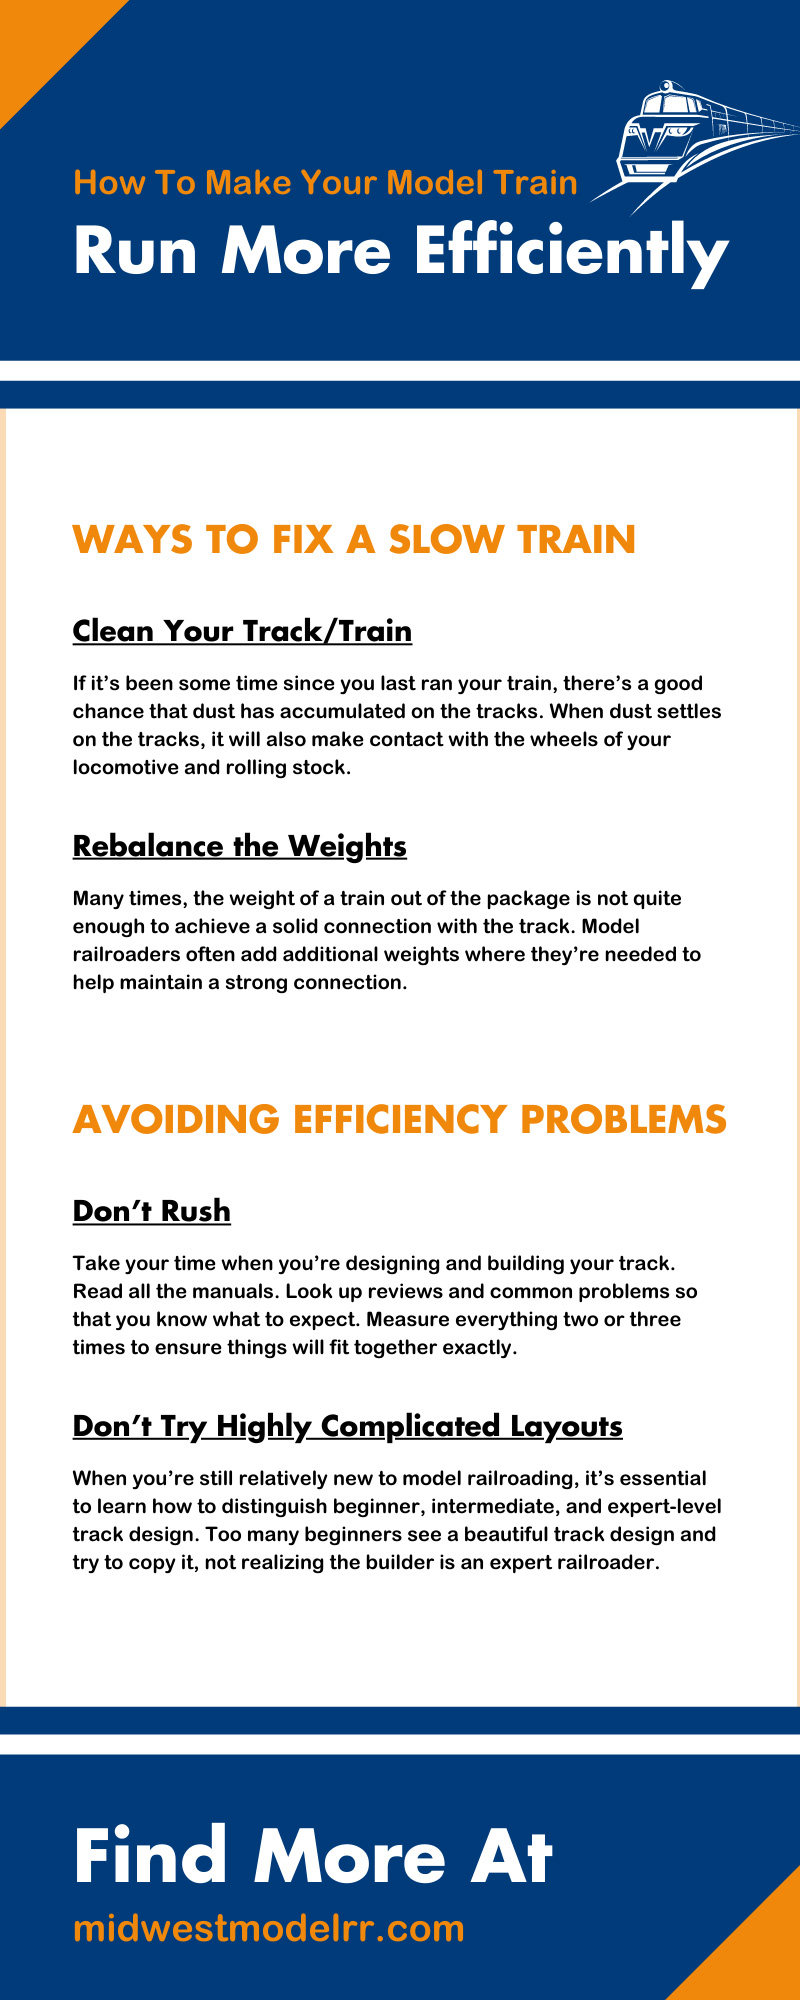 How To Make Your Model Train Run More Efficiently